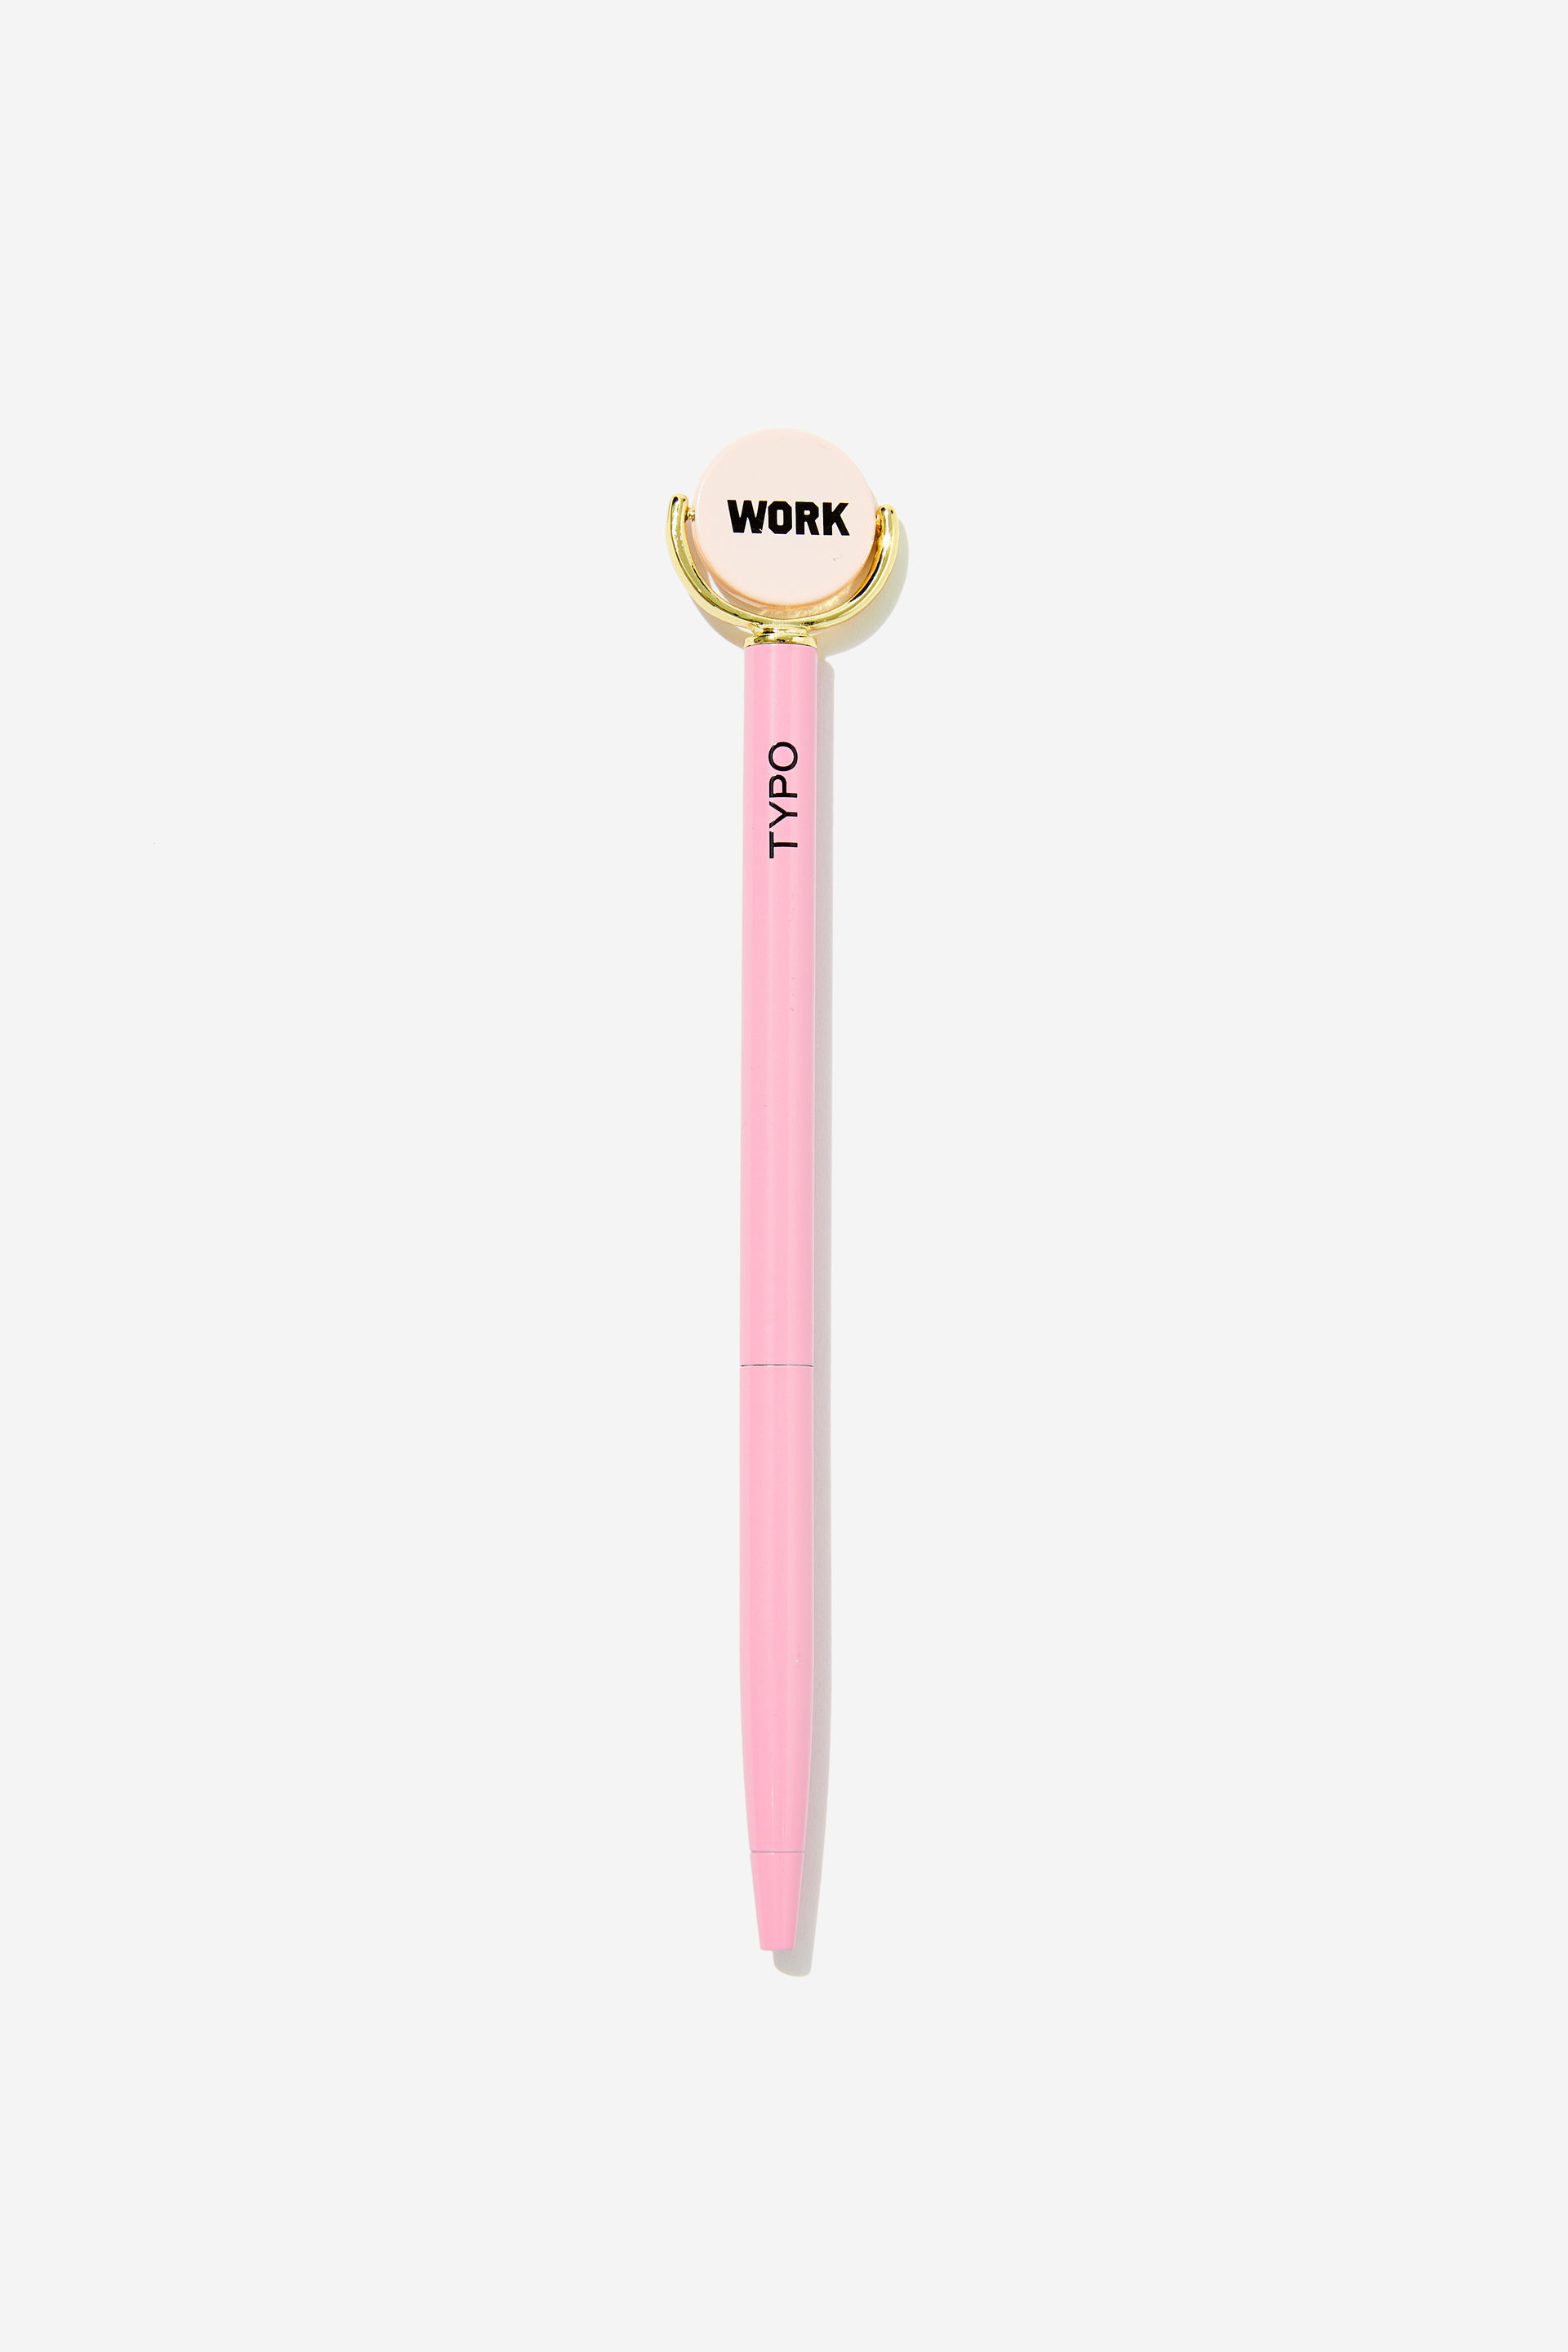 Typo - Spin Top Pen - Pink work rest